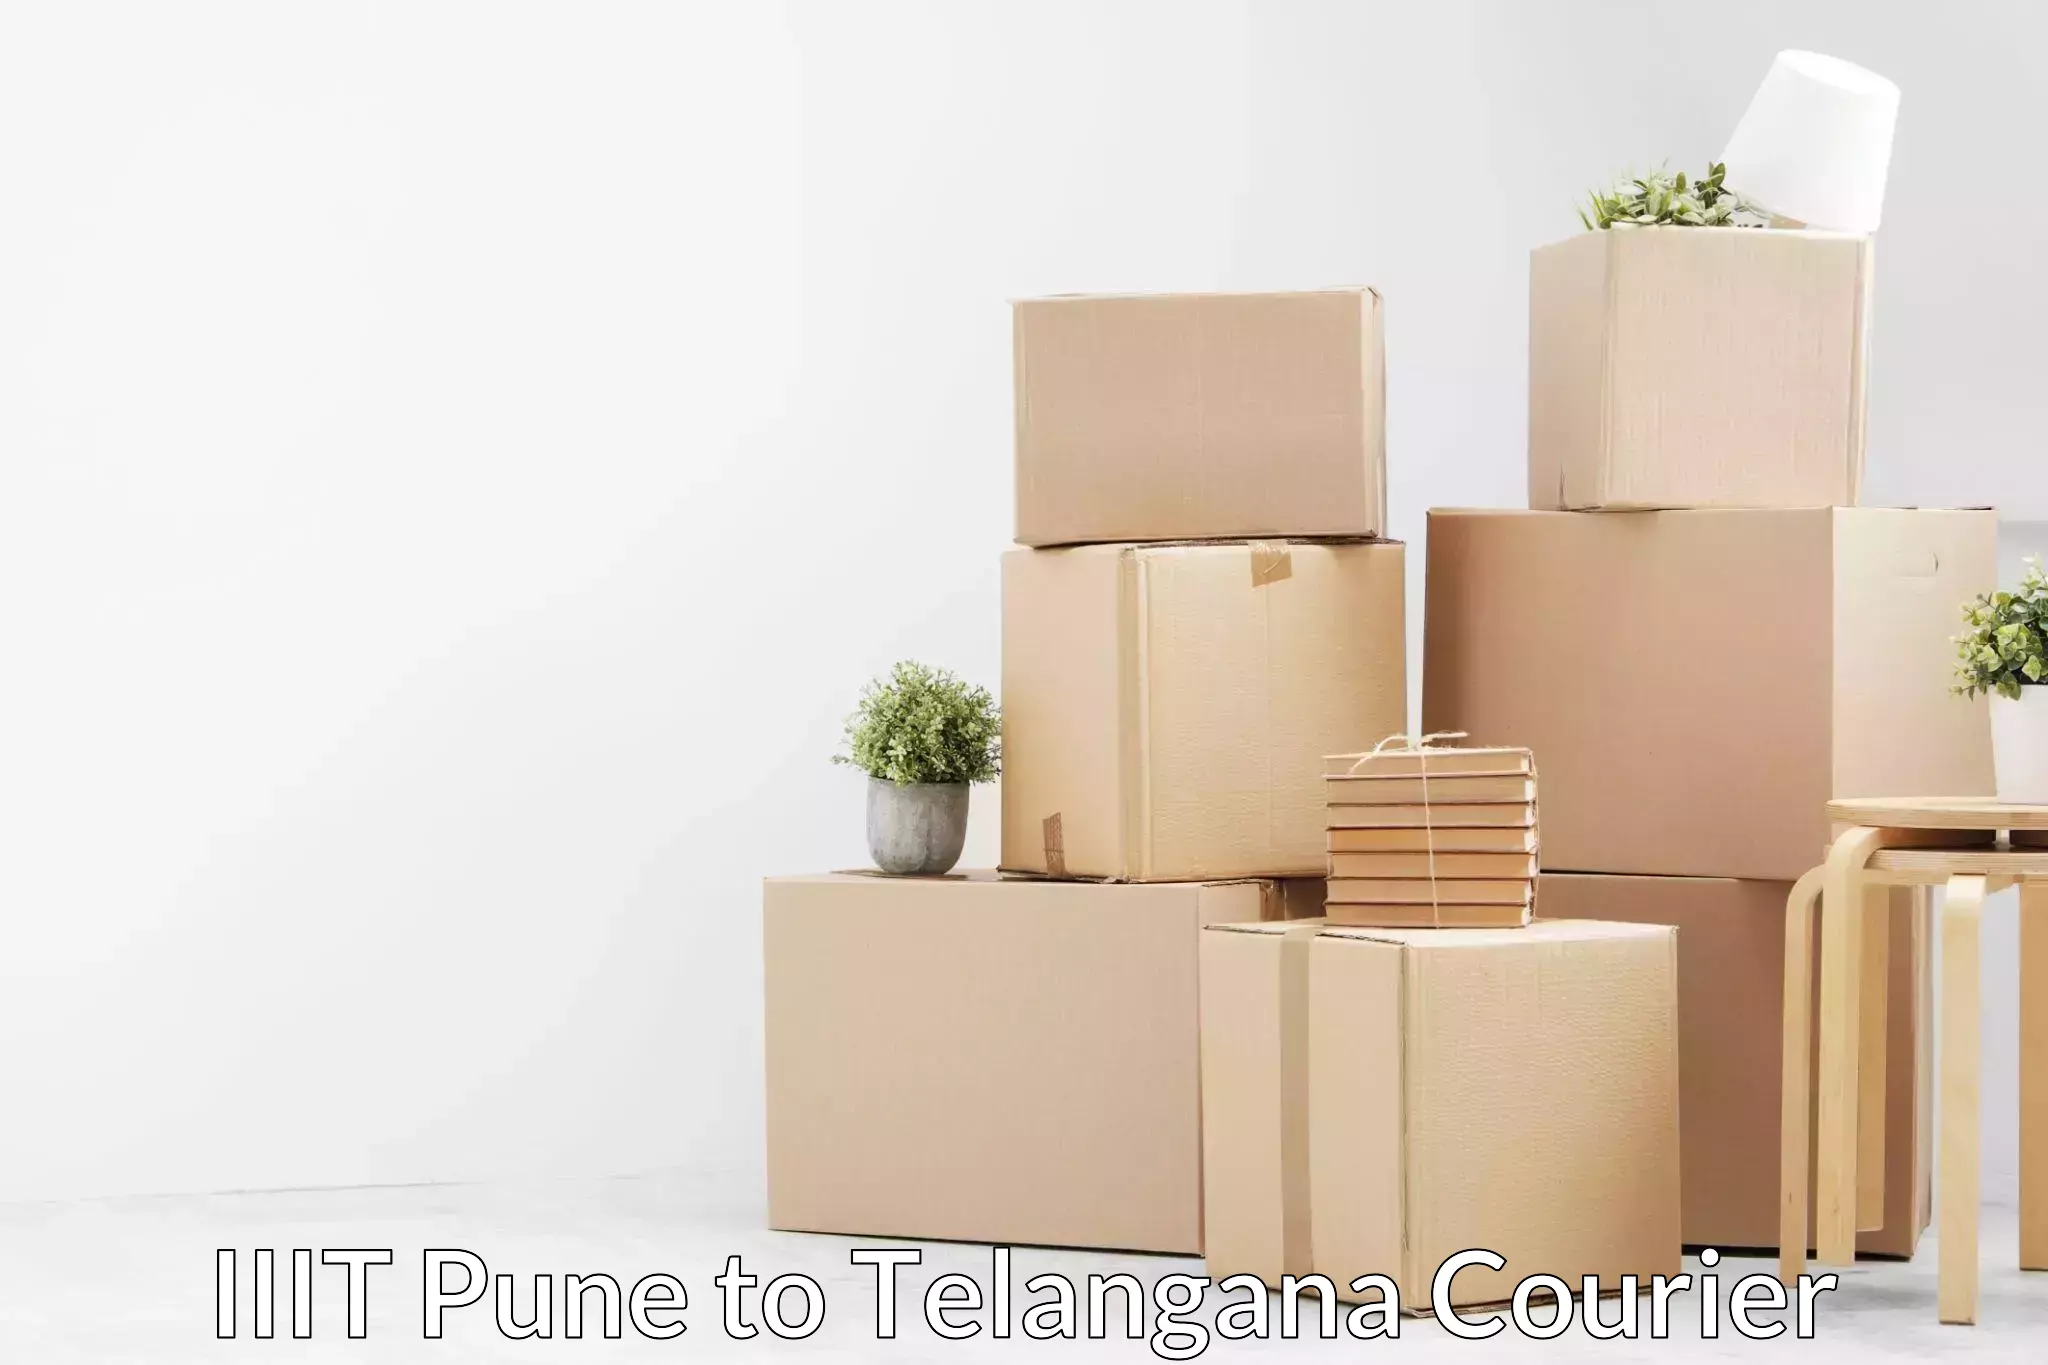 Professional packing services in IIIT Pune to Patancheru